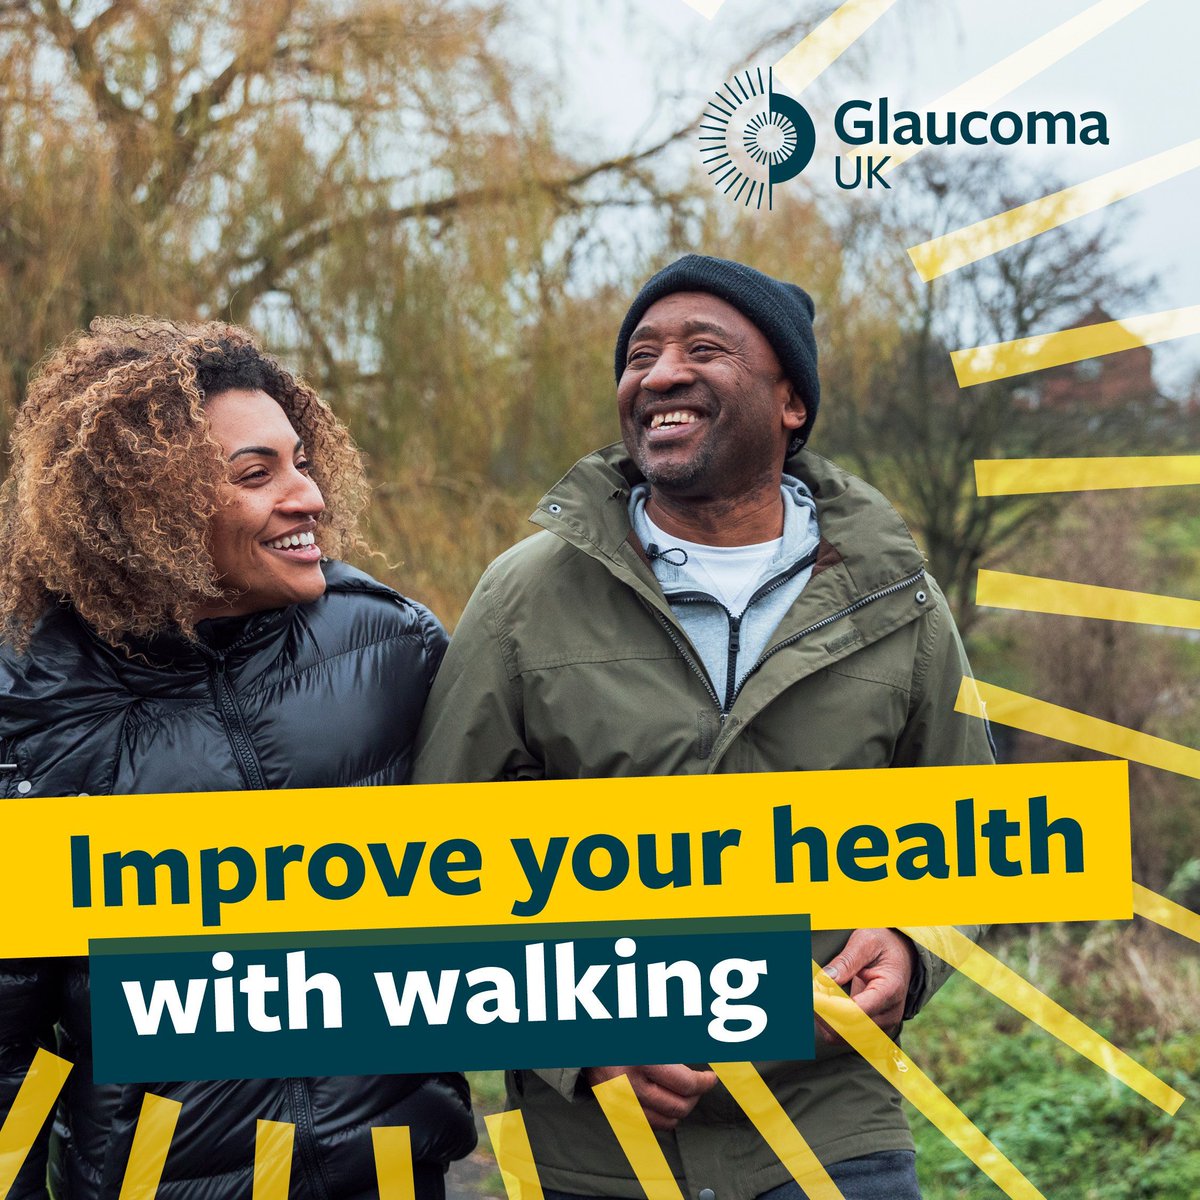 Regular physical activity is great for people with glaucoma as it helps look after overall health. What better way to stay active and healthy than by walking! With May being #NationalWalkingMonth, it's the perfect time to explore new walking routes. #MagicOfWalking